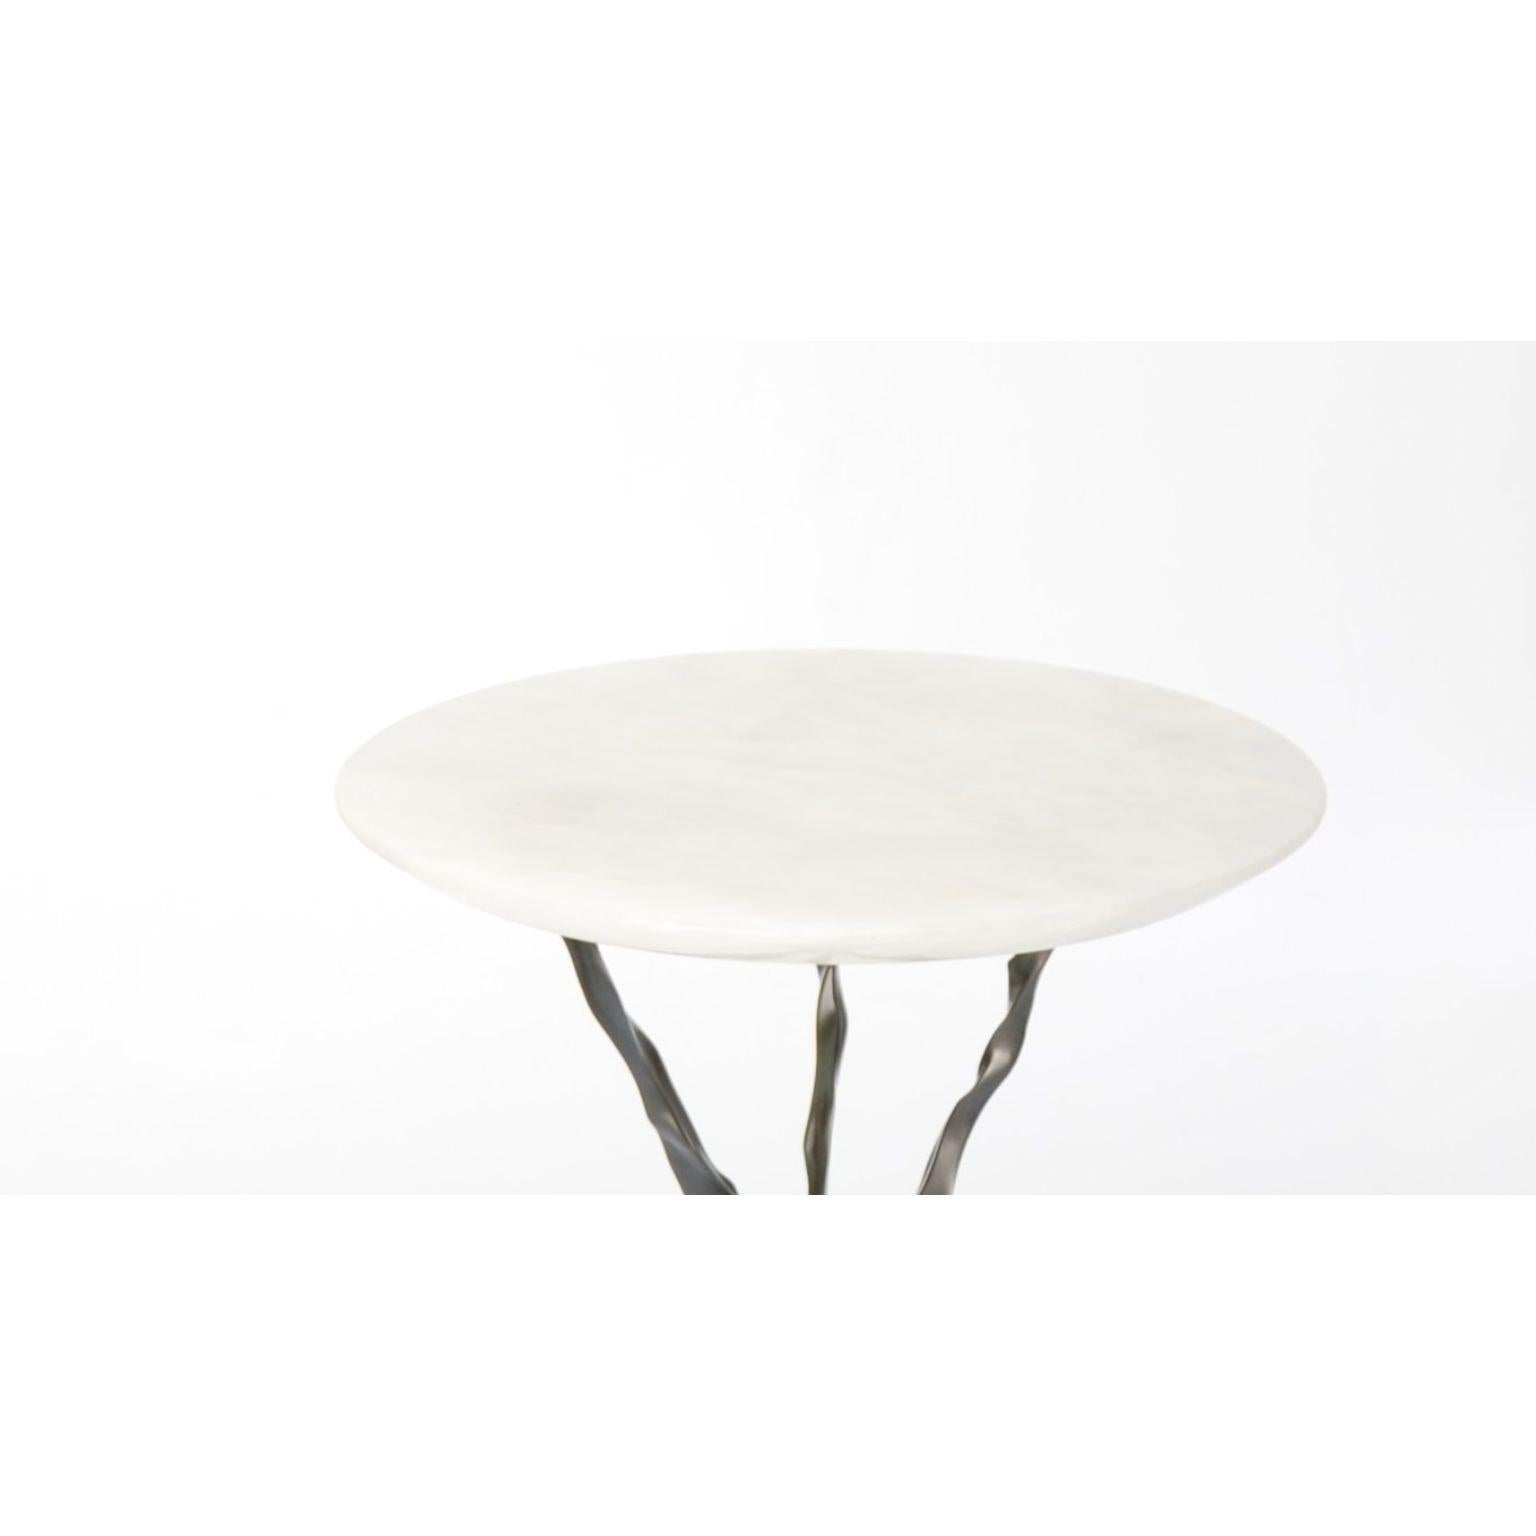 Brazilian Thom Drink Table with Onyx Top by Fakasaka Design For Sale